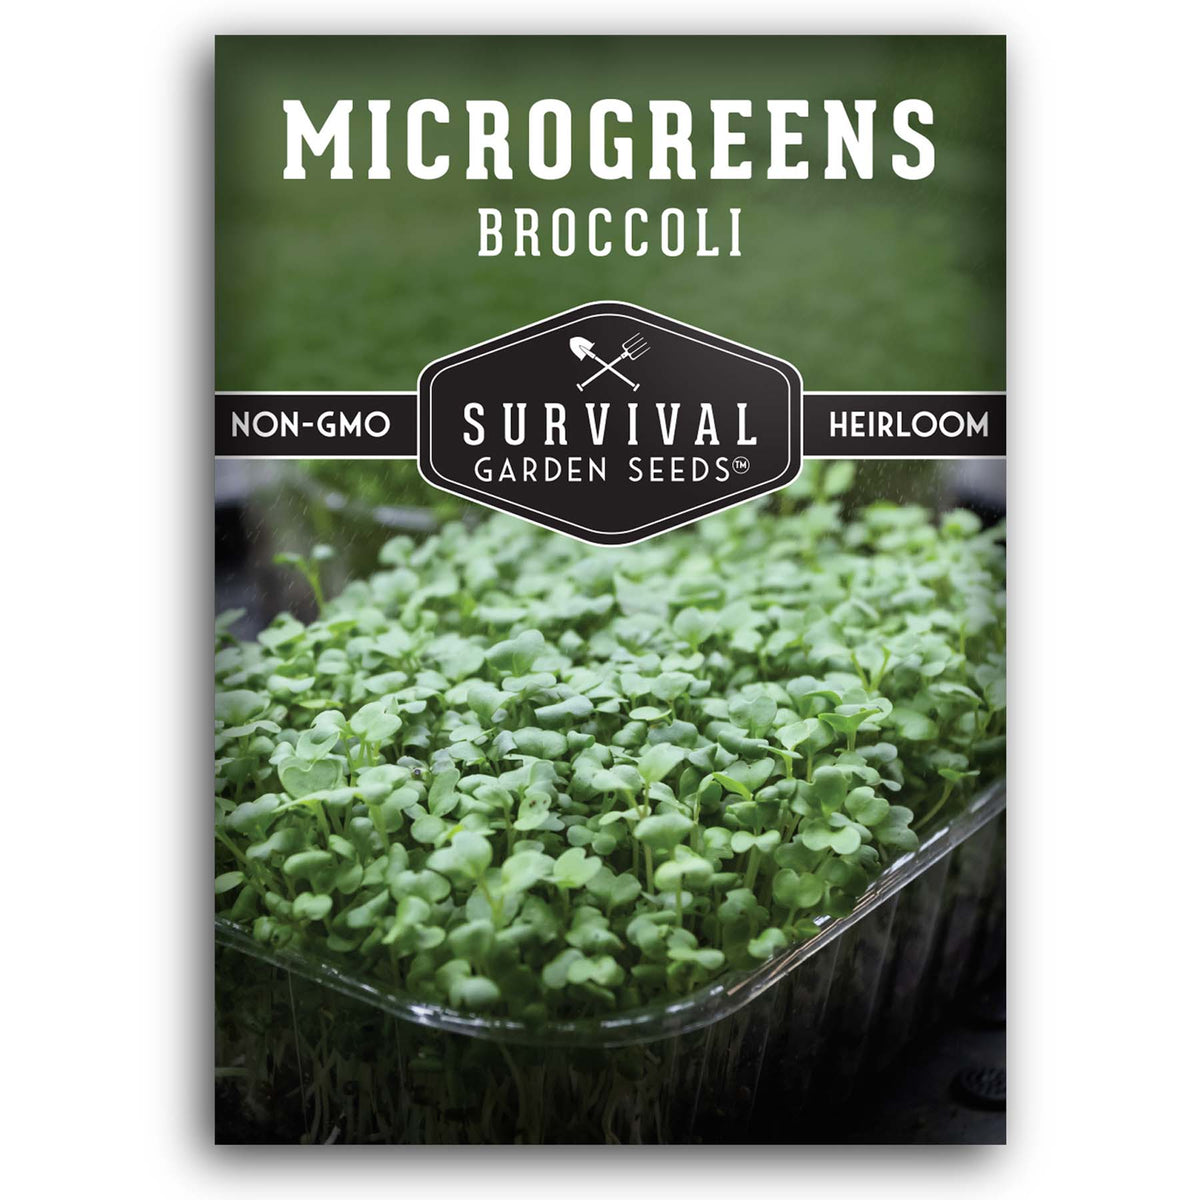 Broccoli Microgreens seeds for sprouting